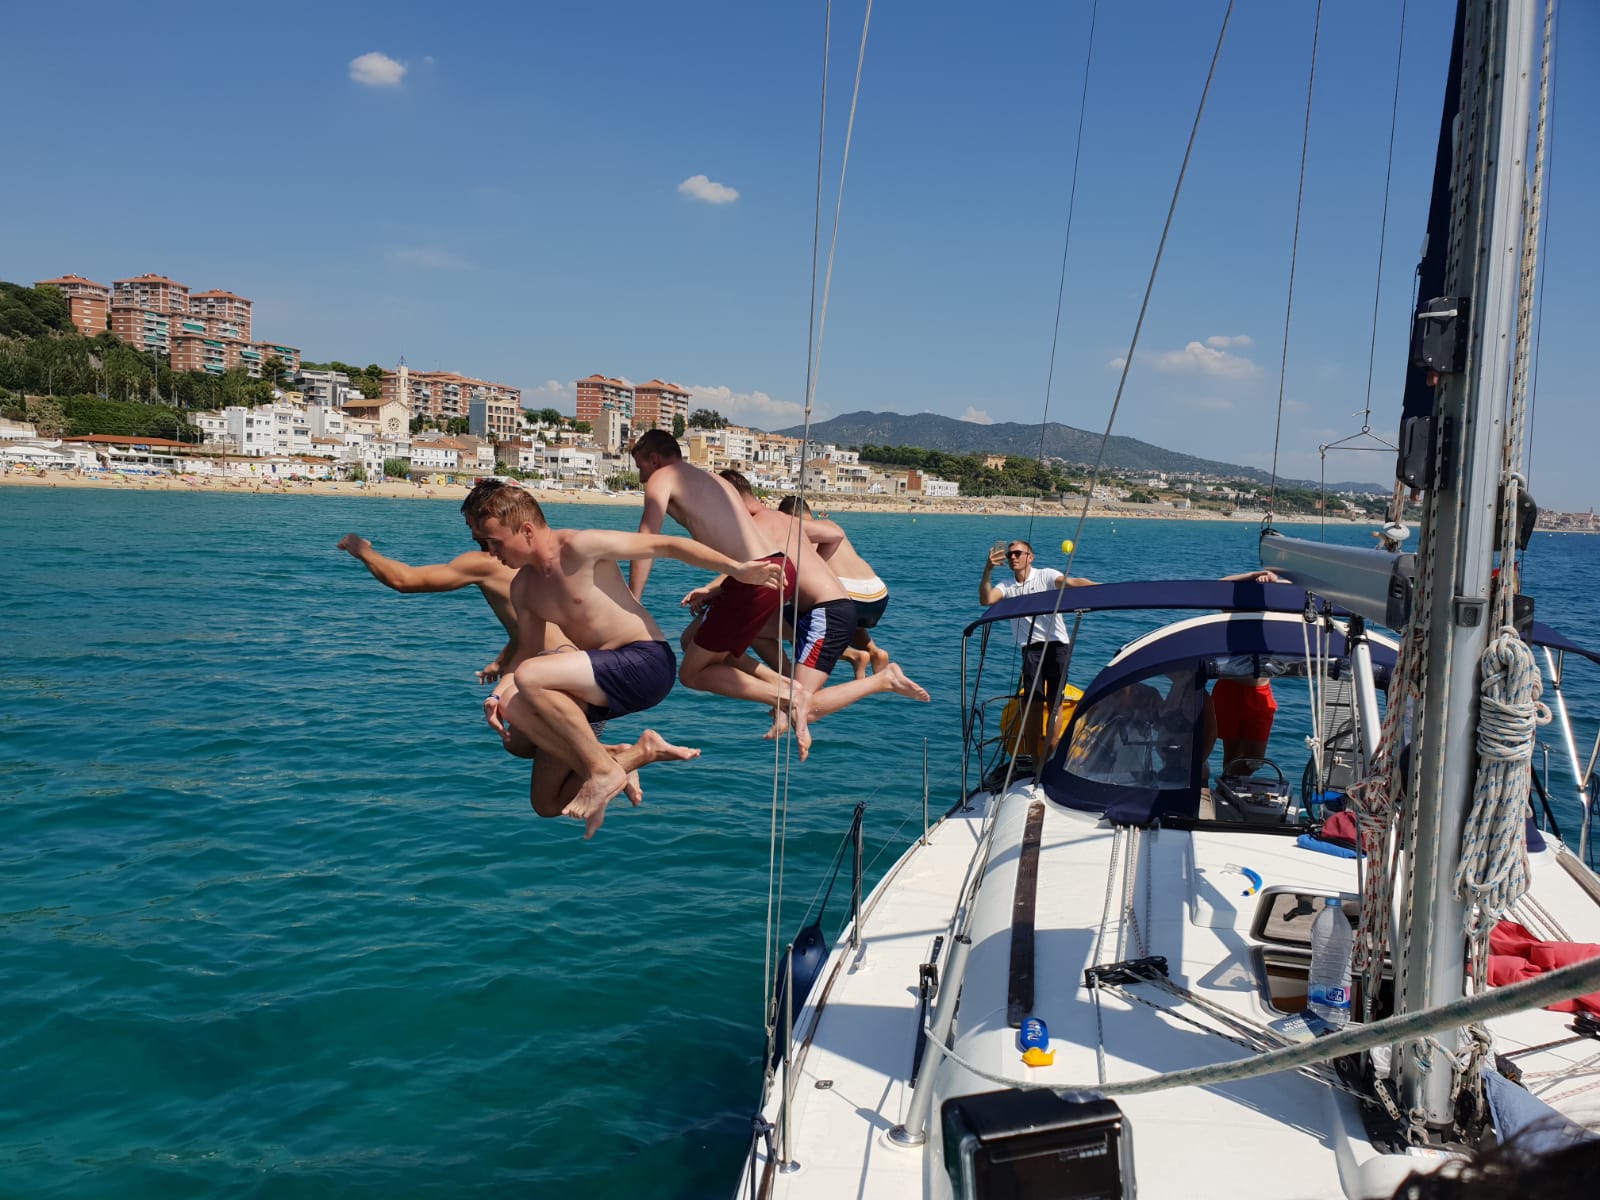 Private sailing tour from Port Olimpic in Barcelona